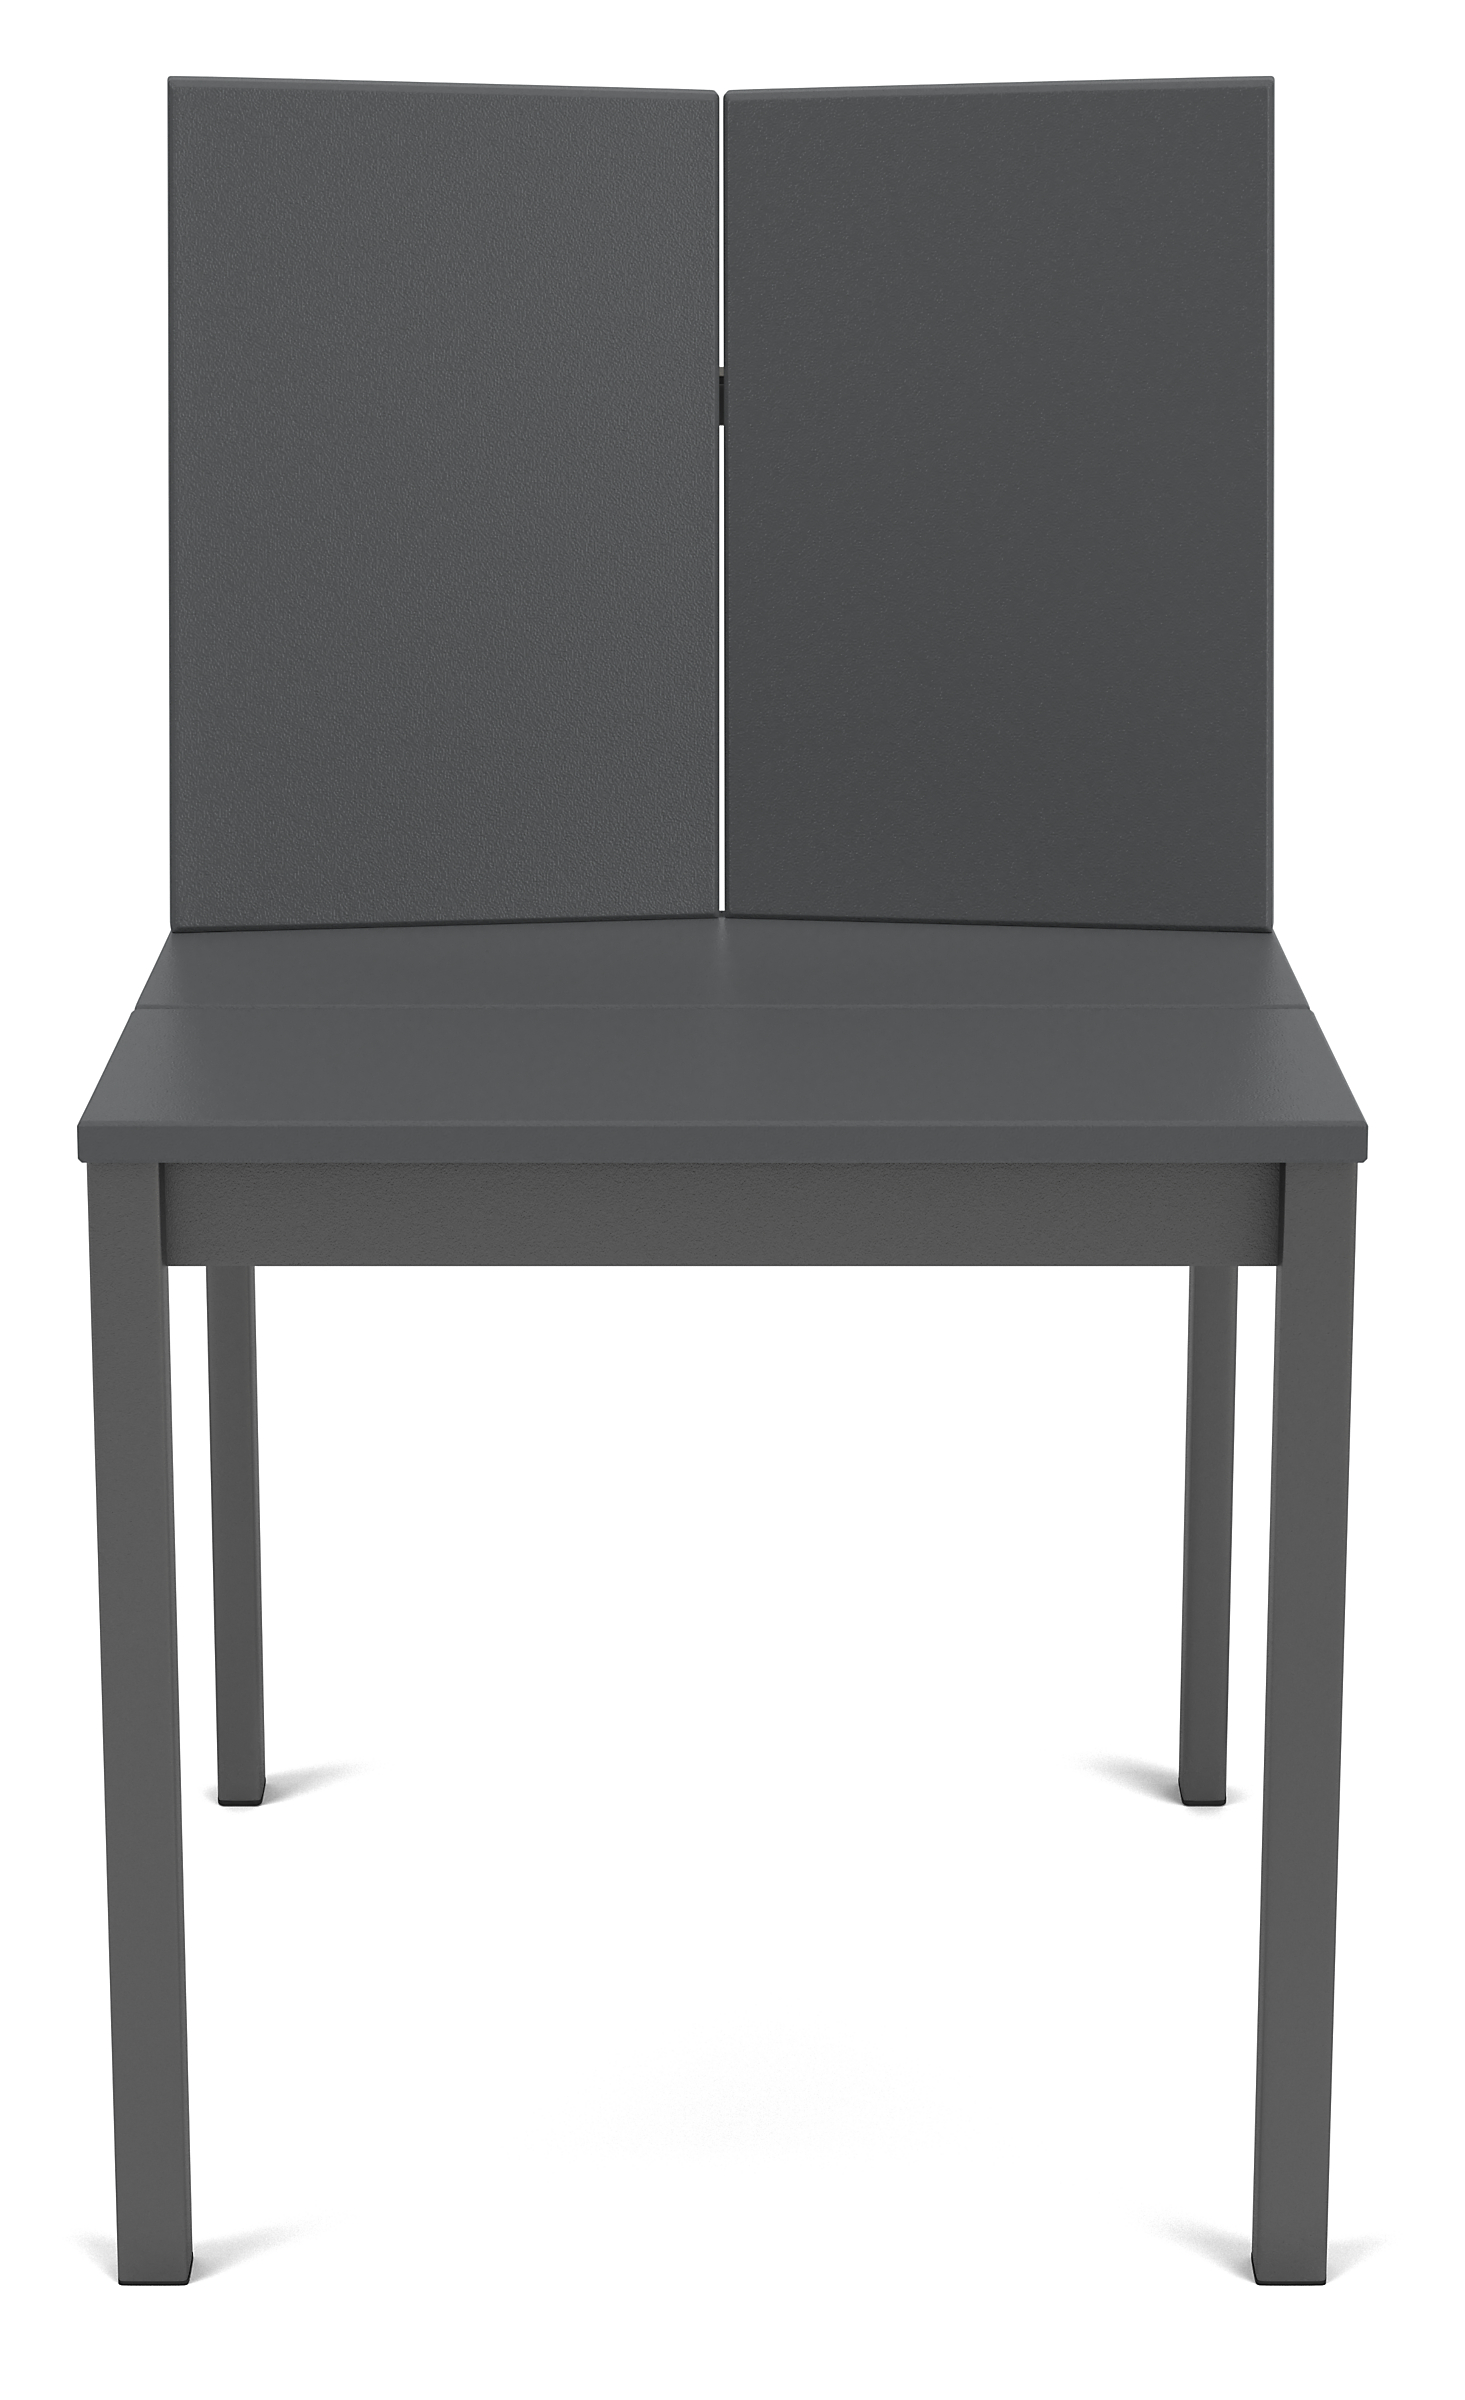 Front view of Mattix Side Chair in Grey HDPE.